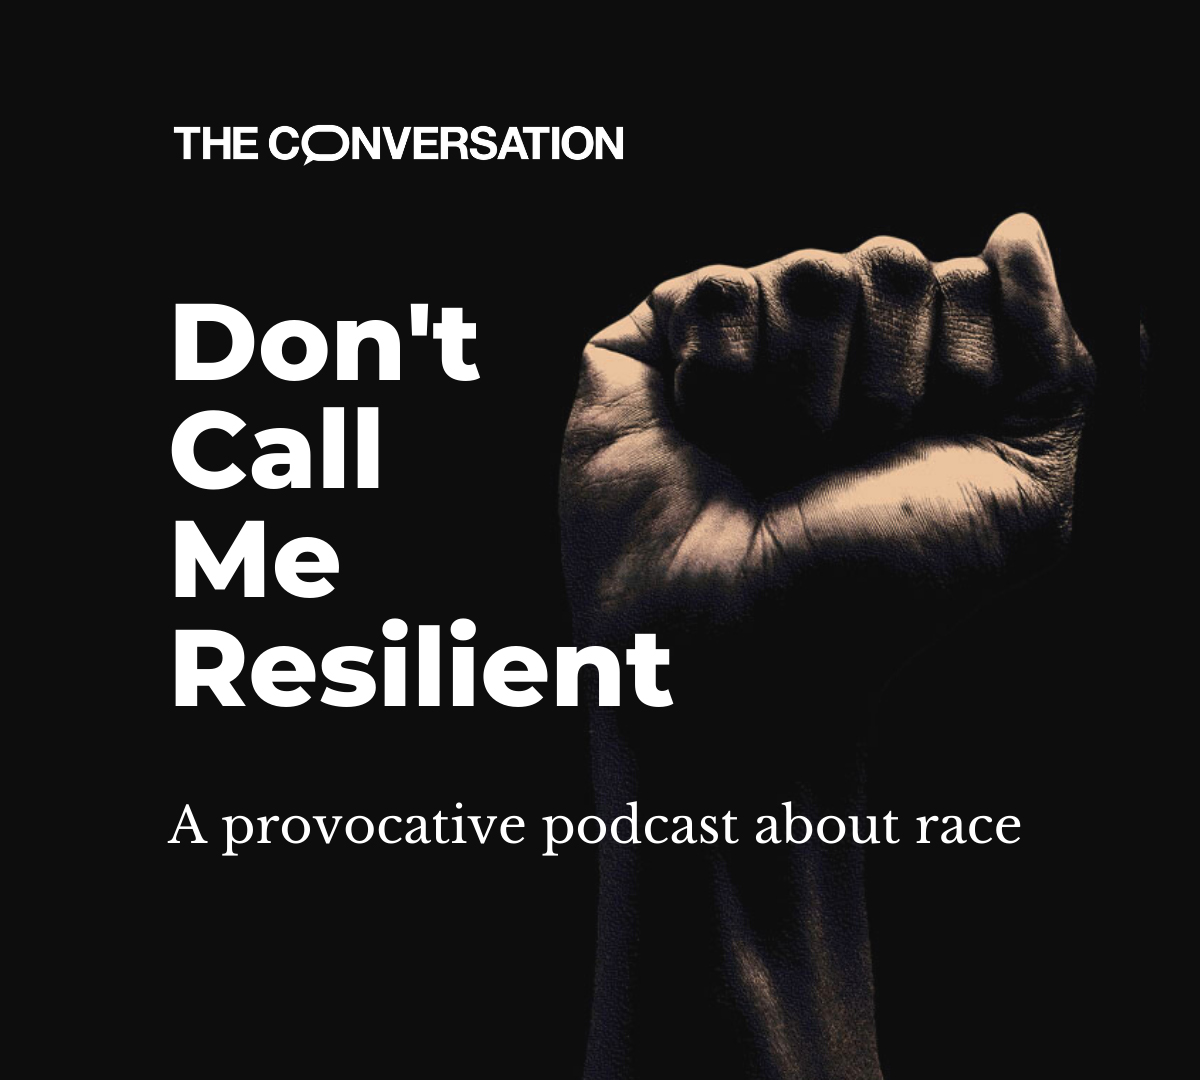 Don't Call Me Resilient, A provocative podcast about race.